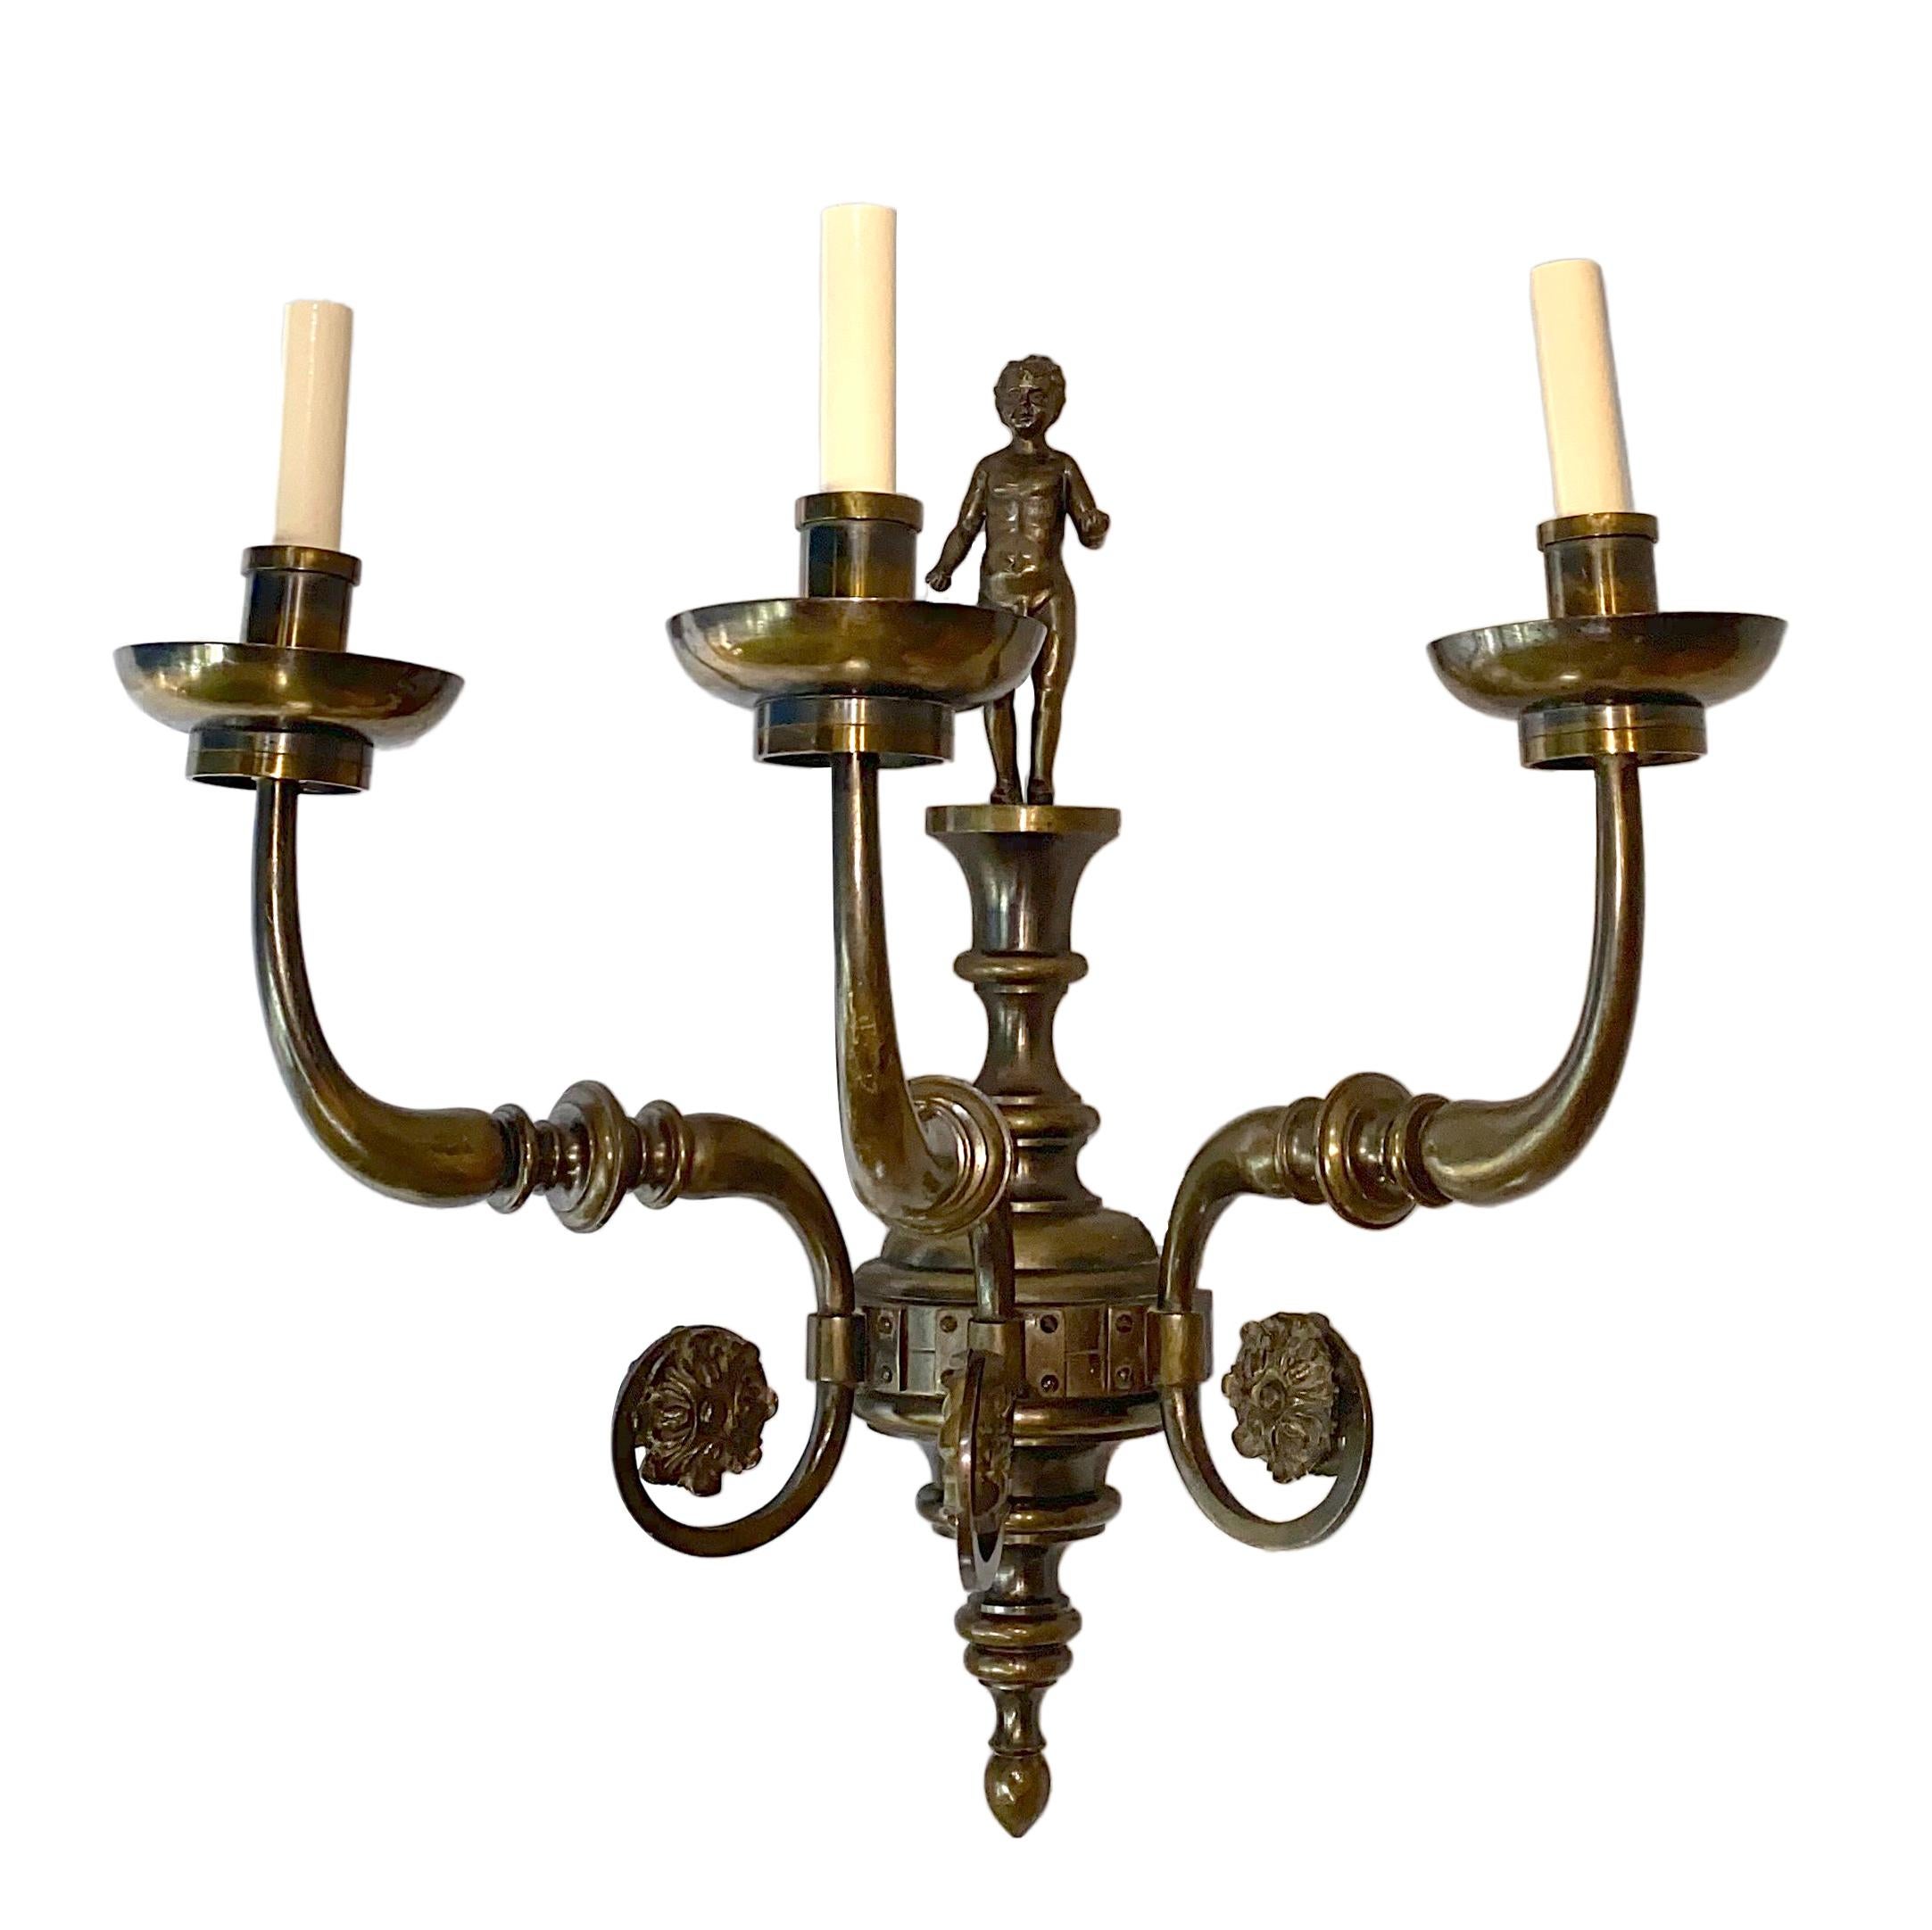 A set of four large circa 1900 Dutch three-arm patinated bronze sconces with figural putto crowning each sconce. Sold per pair.

Measurements:
Height: 23